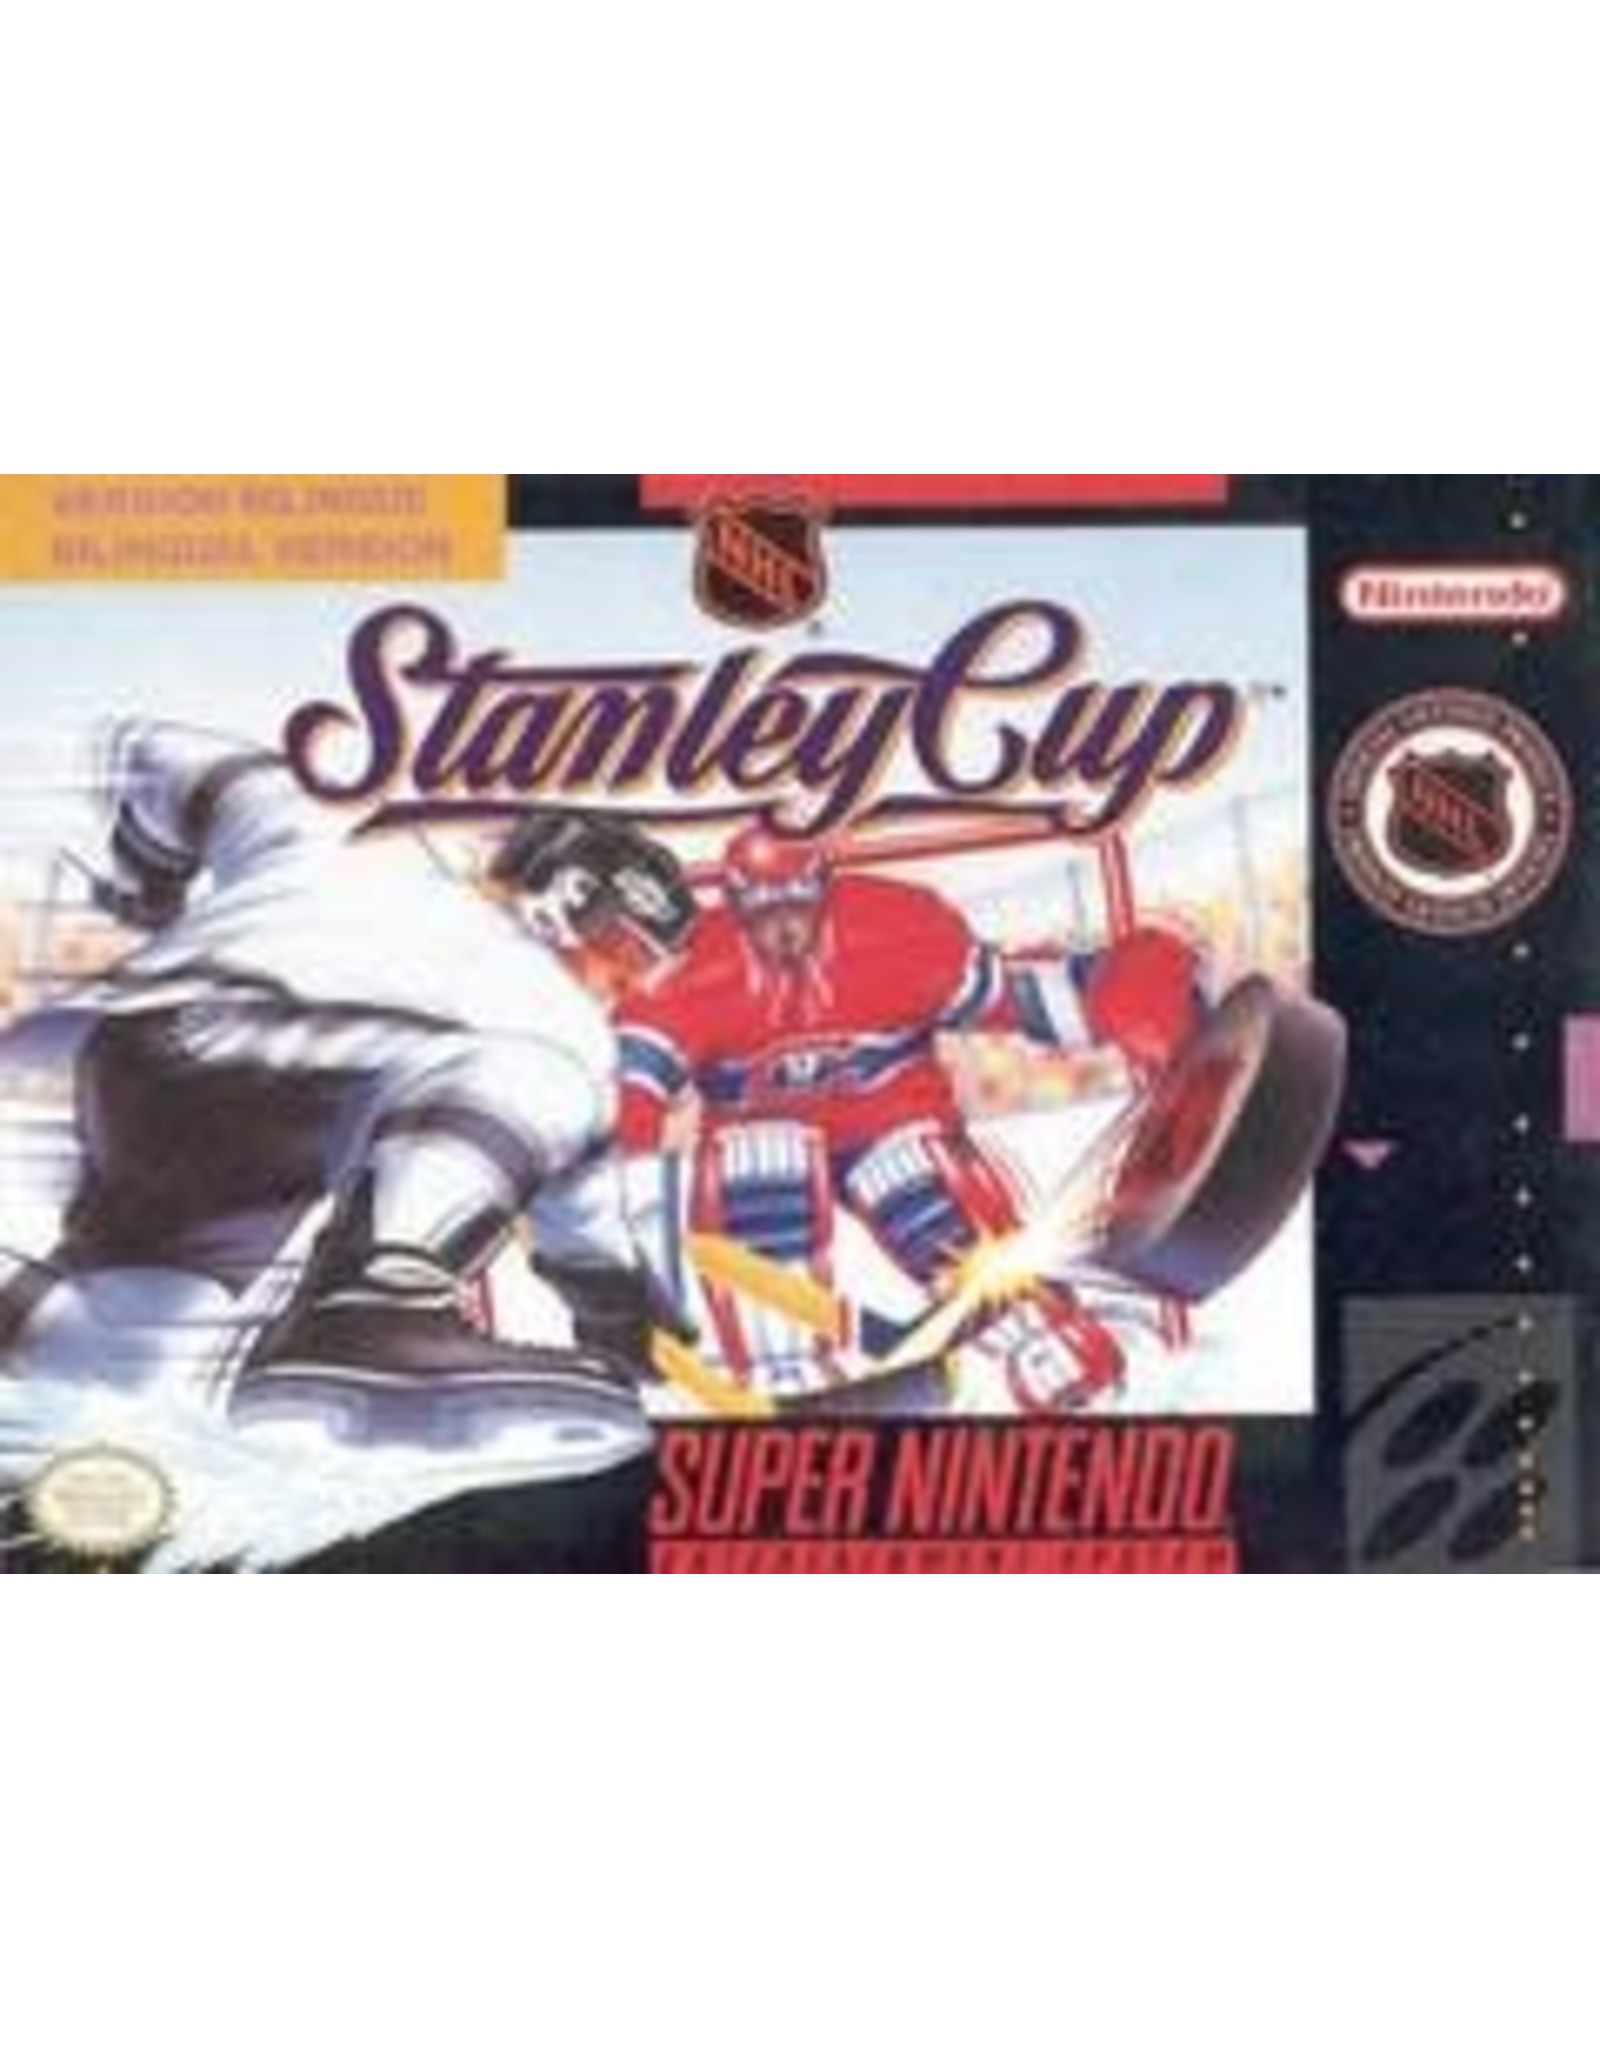 Super Nintendo NHL Stanley Cup (Used, Cart Only, Cosmetic Damage)